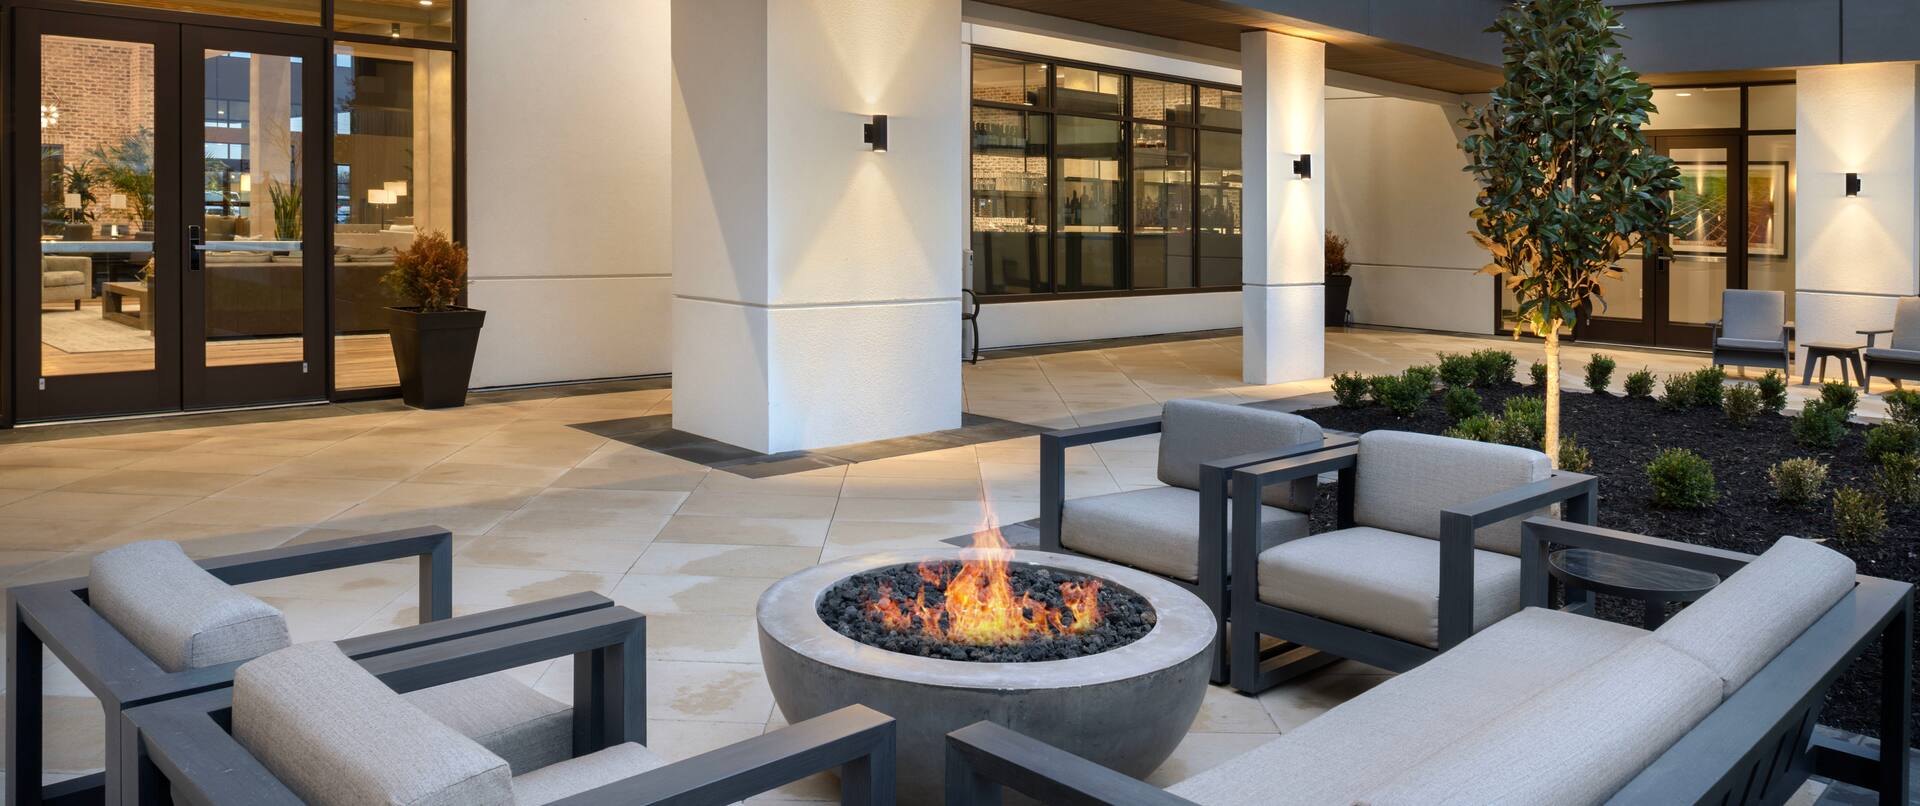 outdoor patio, fire pit and patio furniture